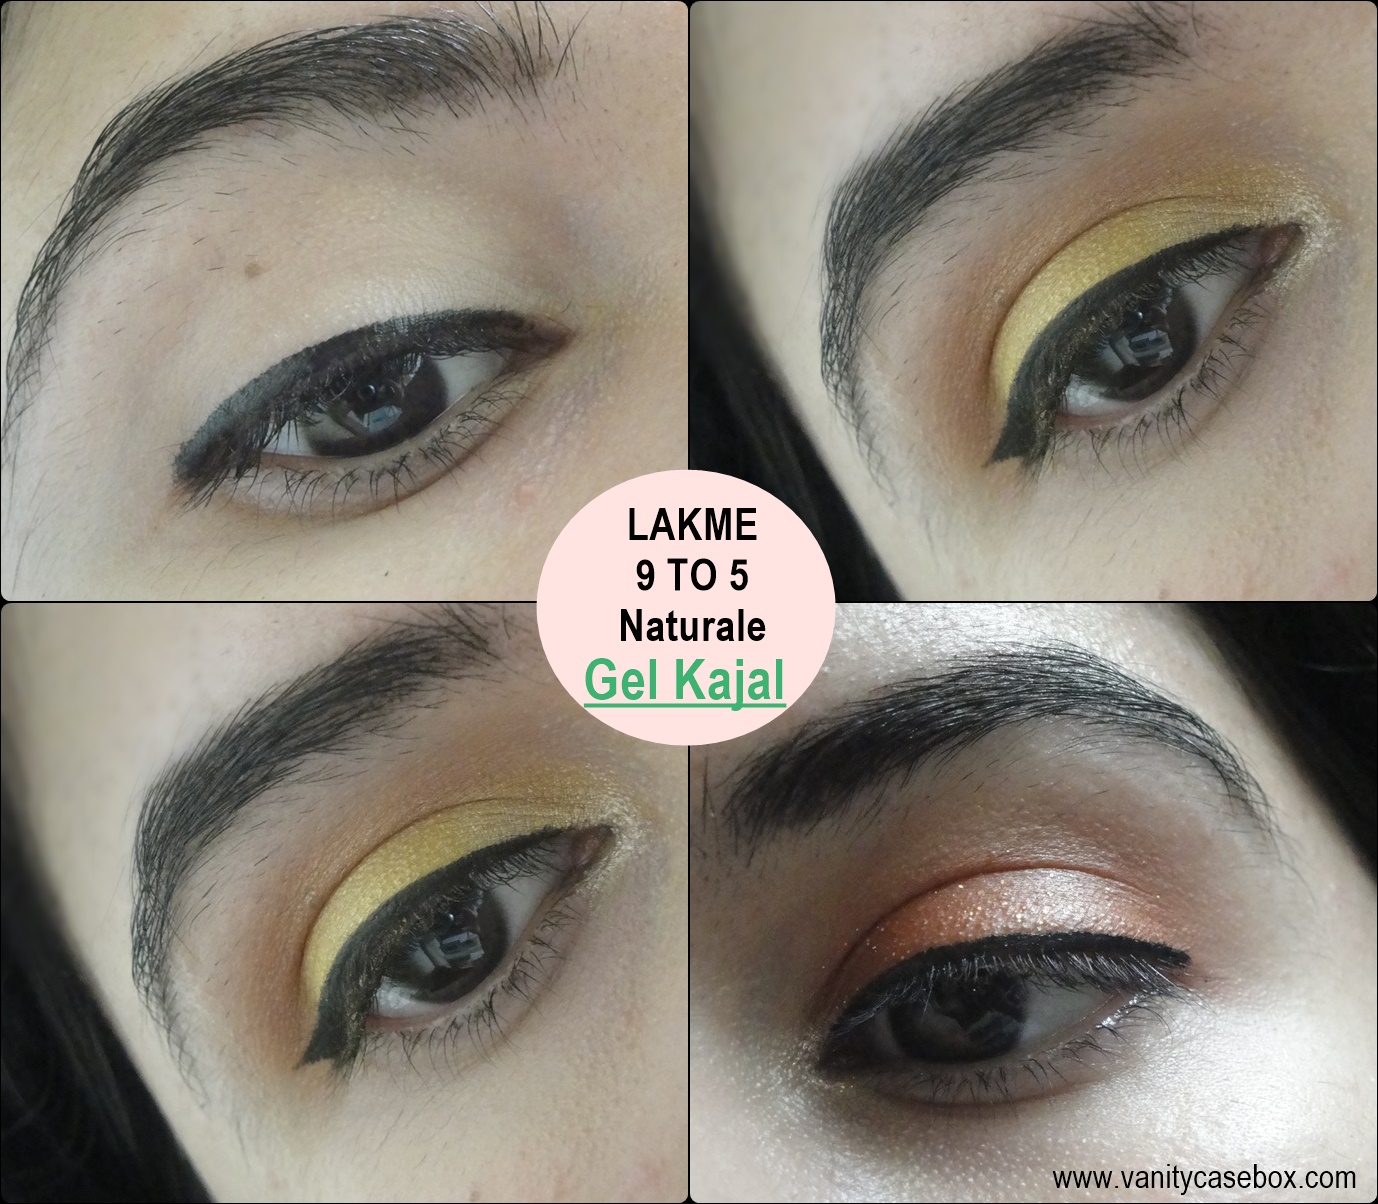 Lakme 9 to 5 naturale gel kajal swatches